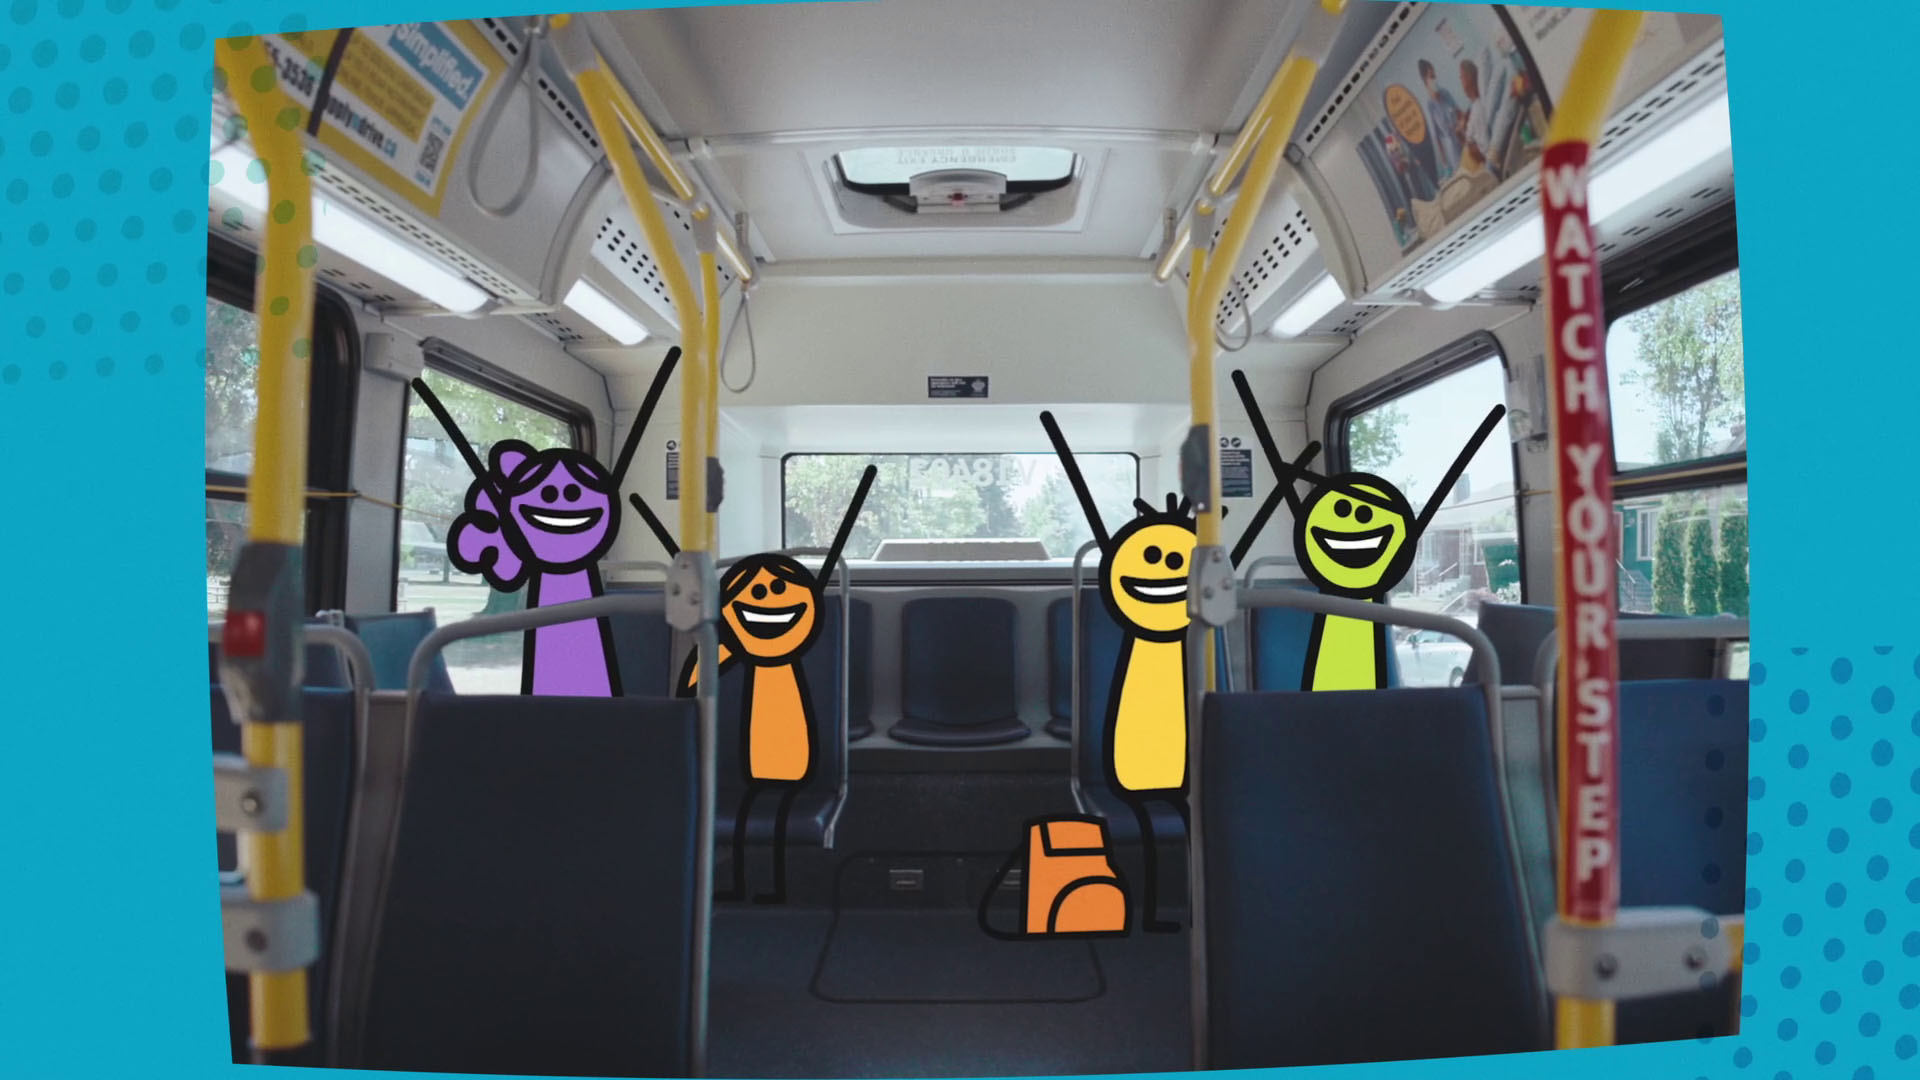 Stick figures of kids riding the bus